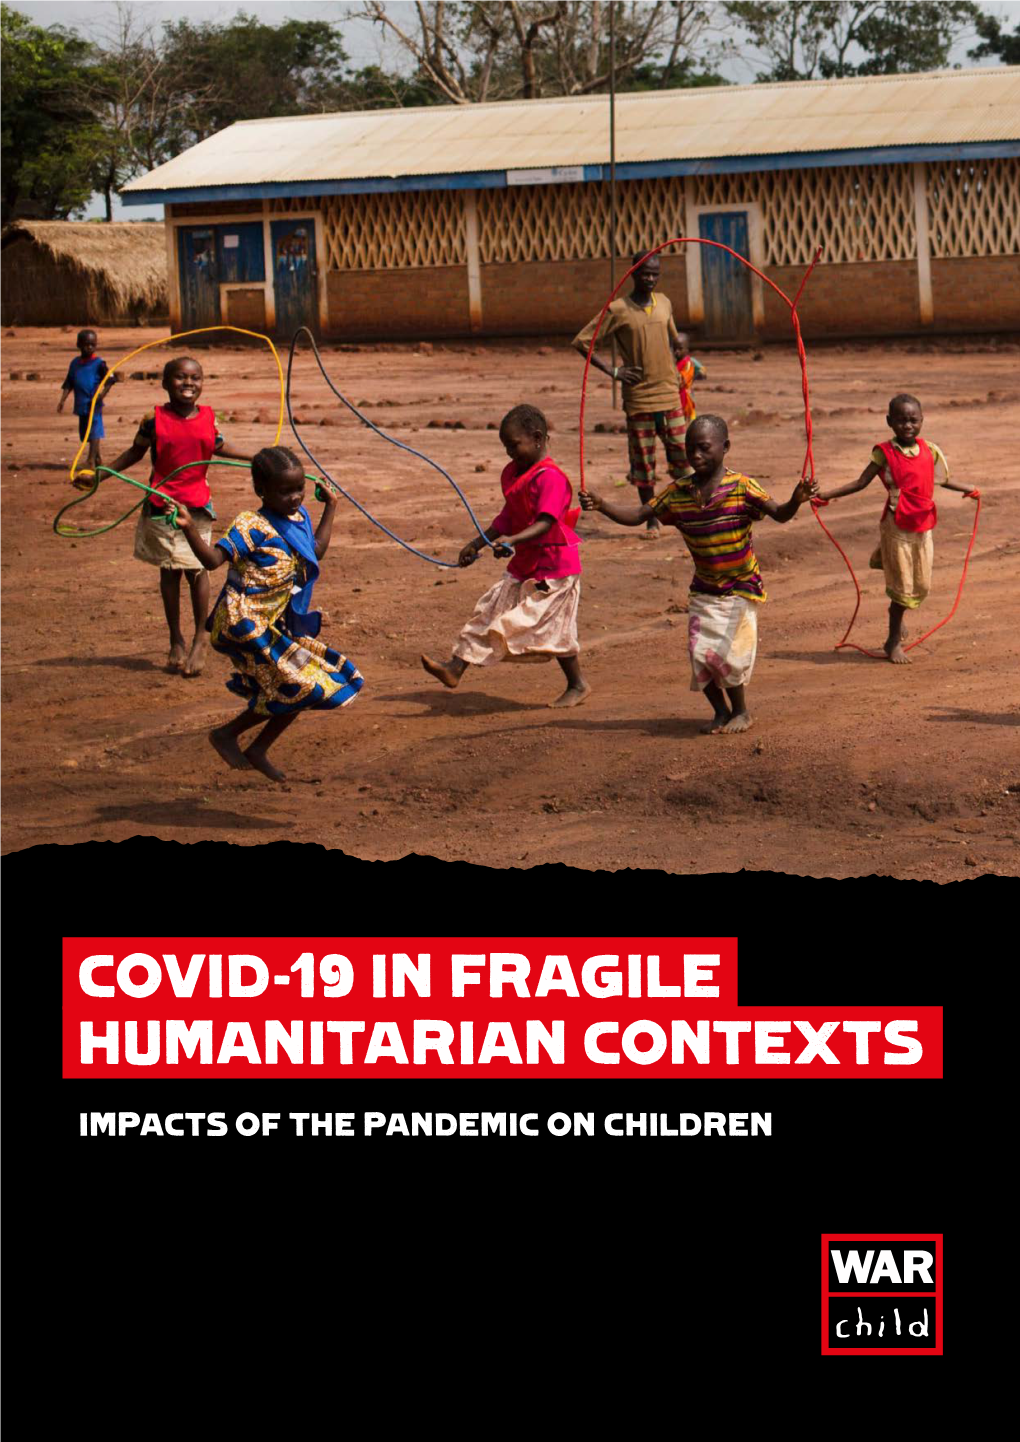 Covid-19 in Fragile Humanitarian Contexts: Impacts of the Pandemic on Children